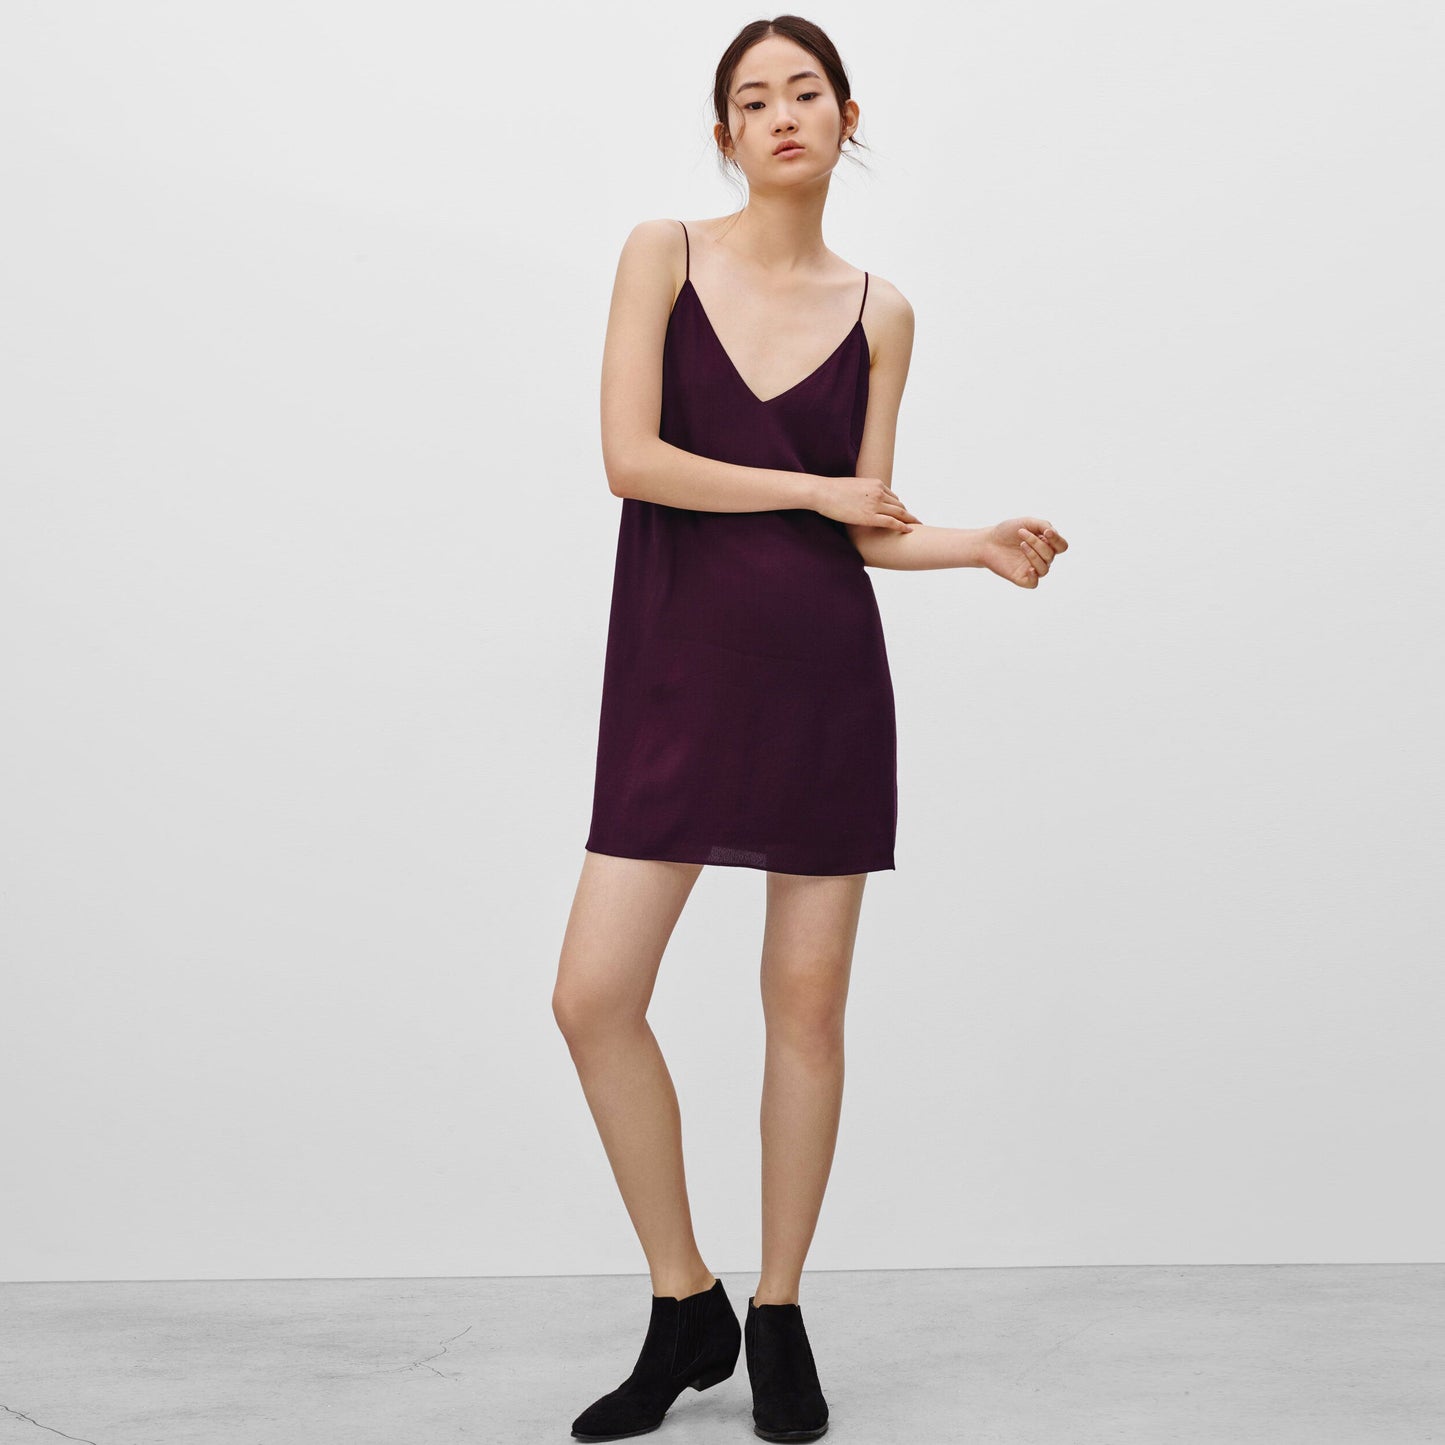 Wilfred Free Vivienne Slip Dress - size Small